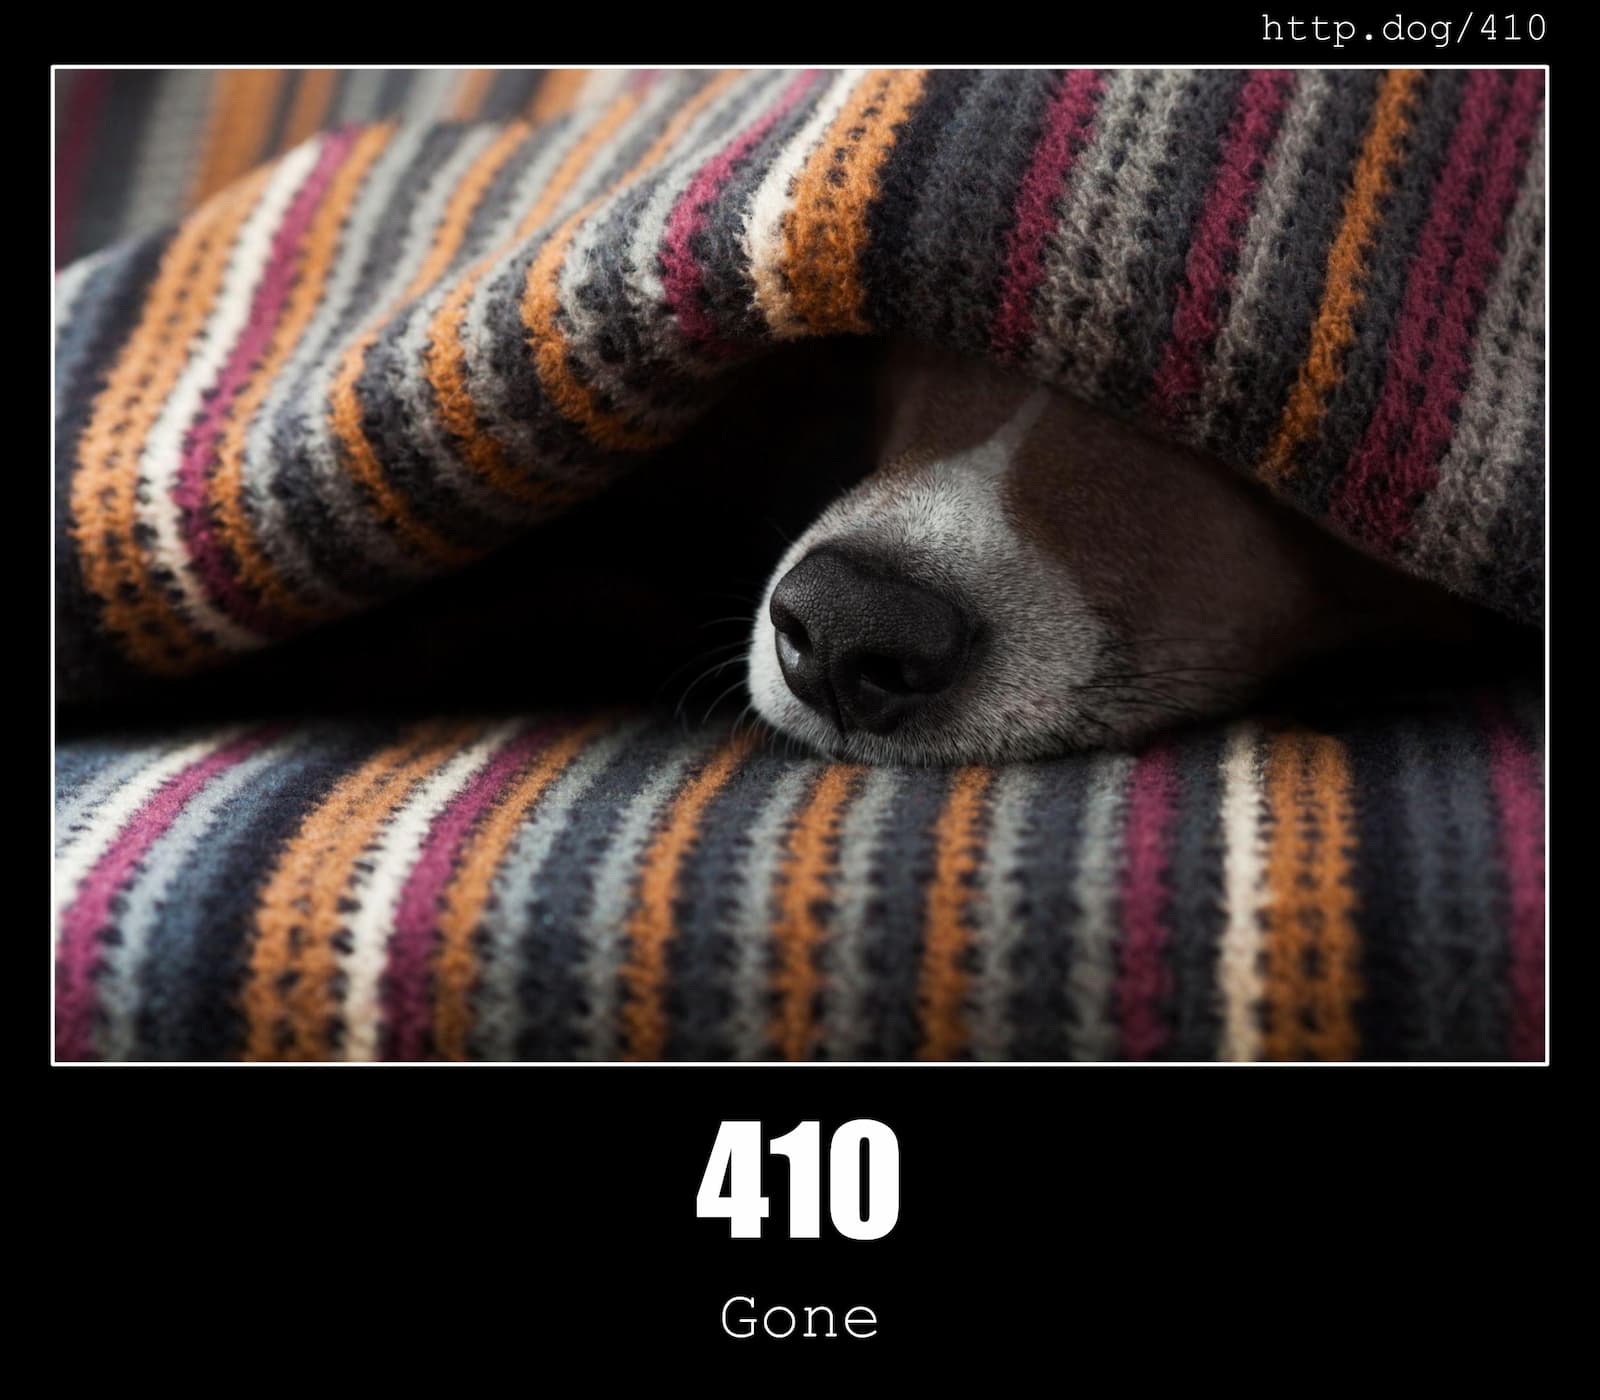 HTTP Status Code 410 Gone & Dogs